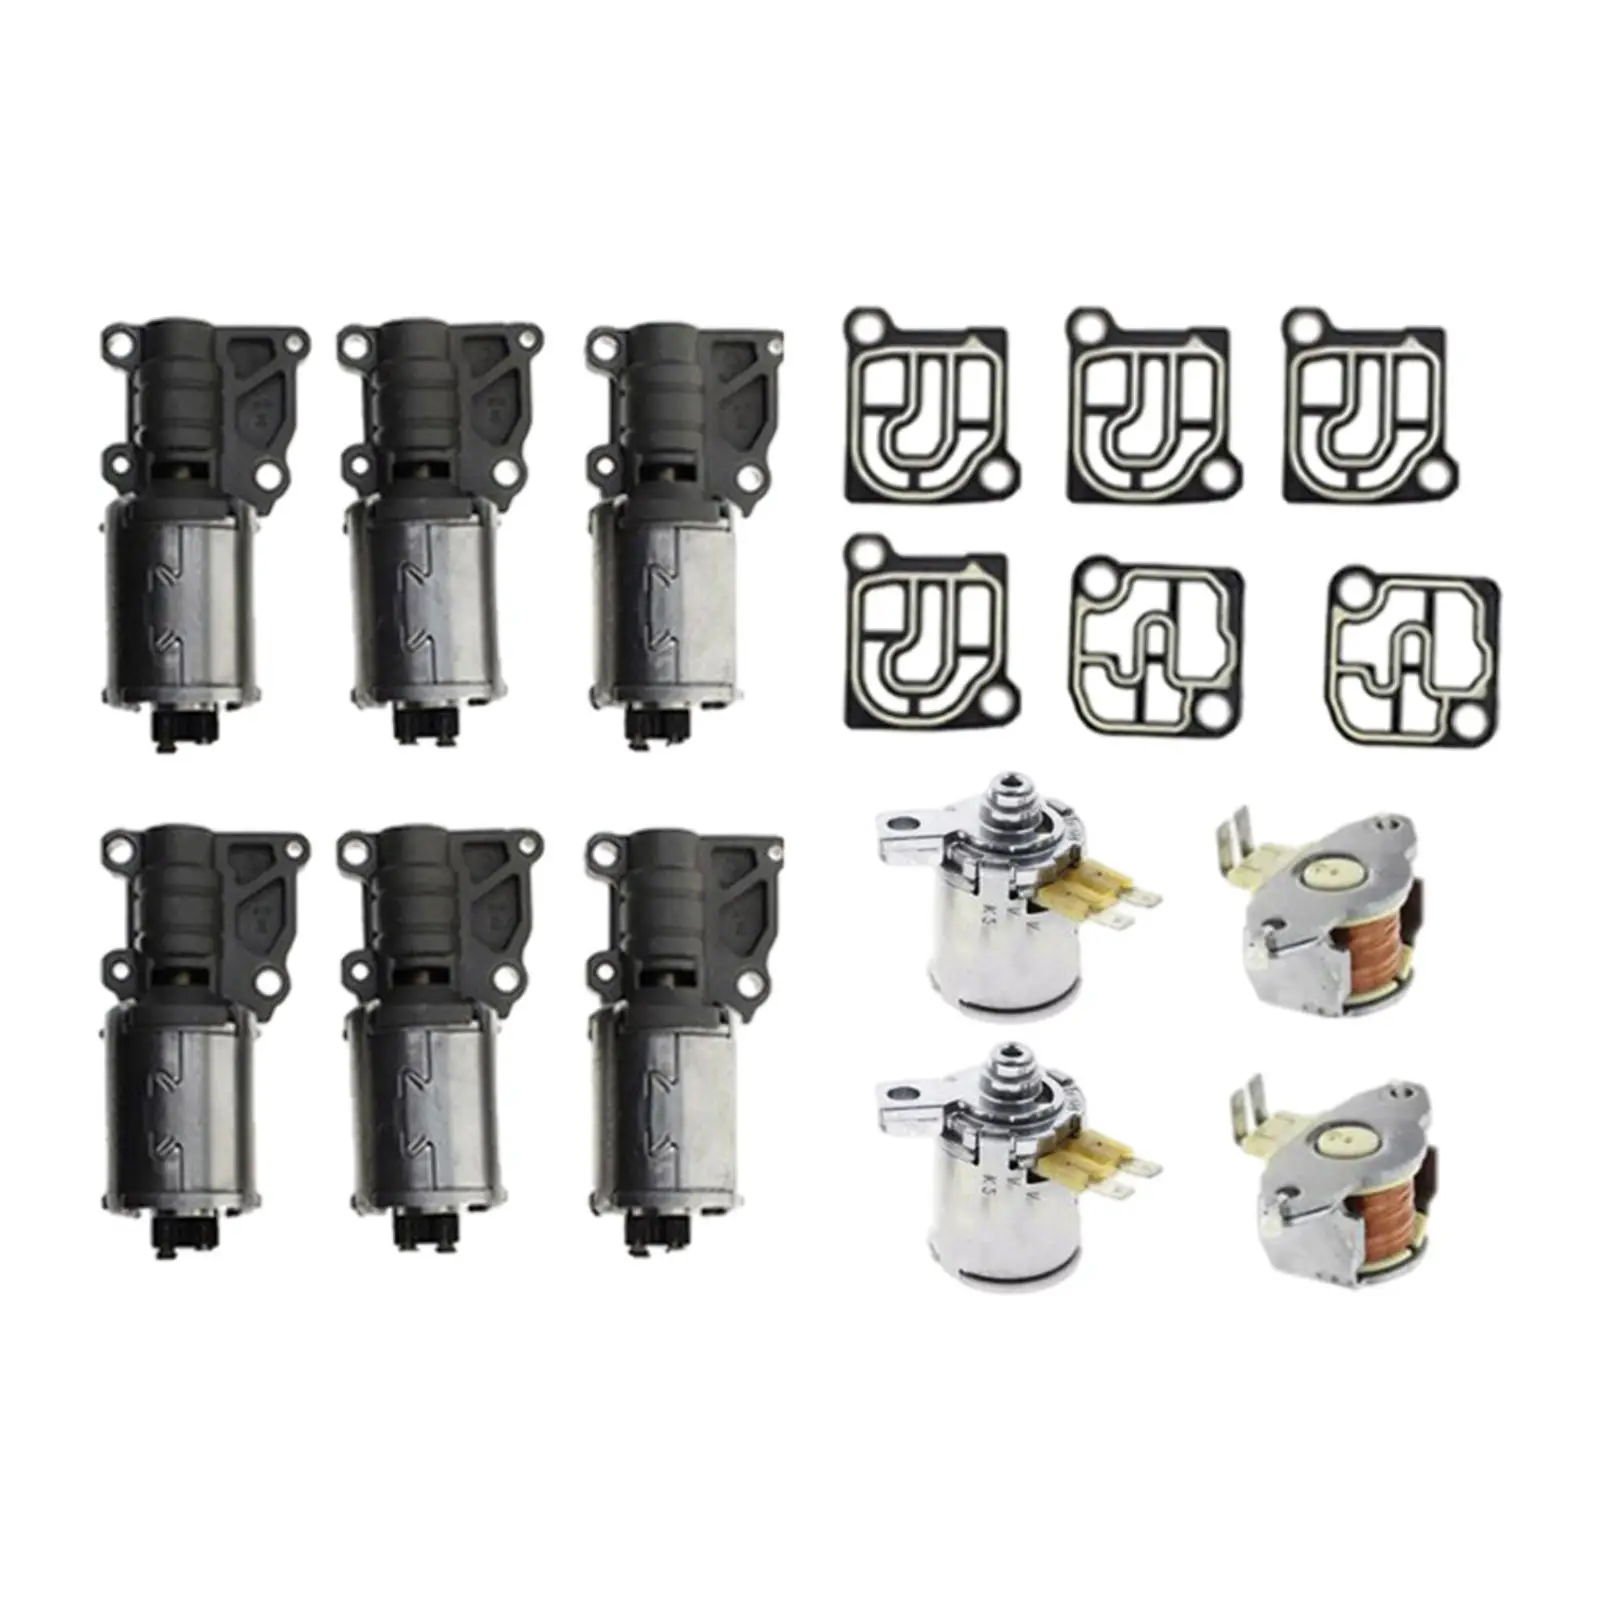 0B5 DL501 Transmission Solenoids Valve Set Compatible for Audi A4 S4 A5 S5 A6 A7 Q5 DQ500 with Circed Boards